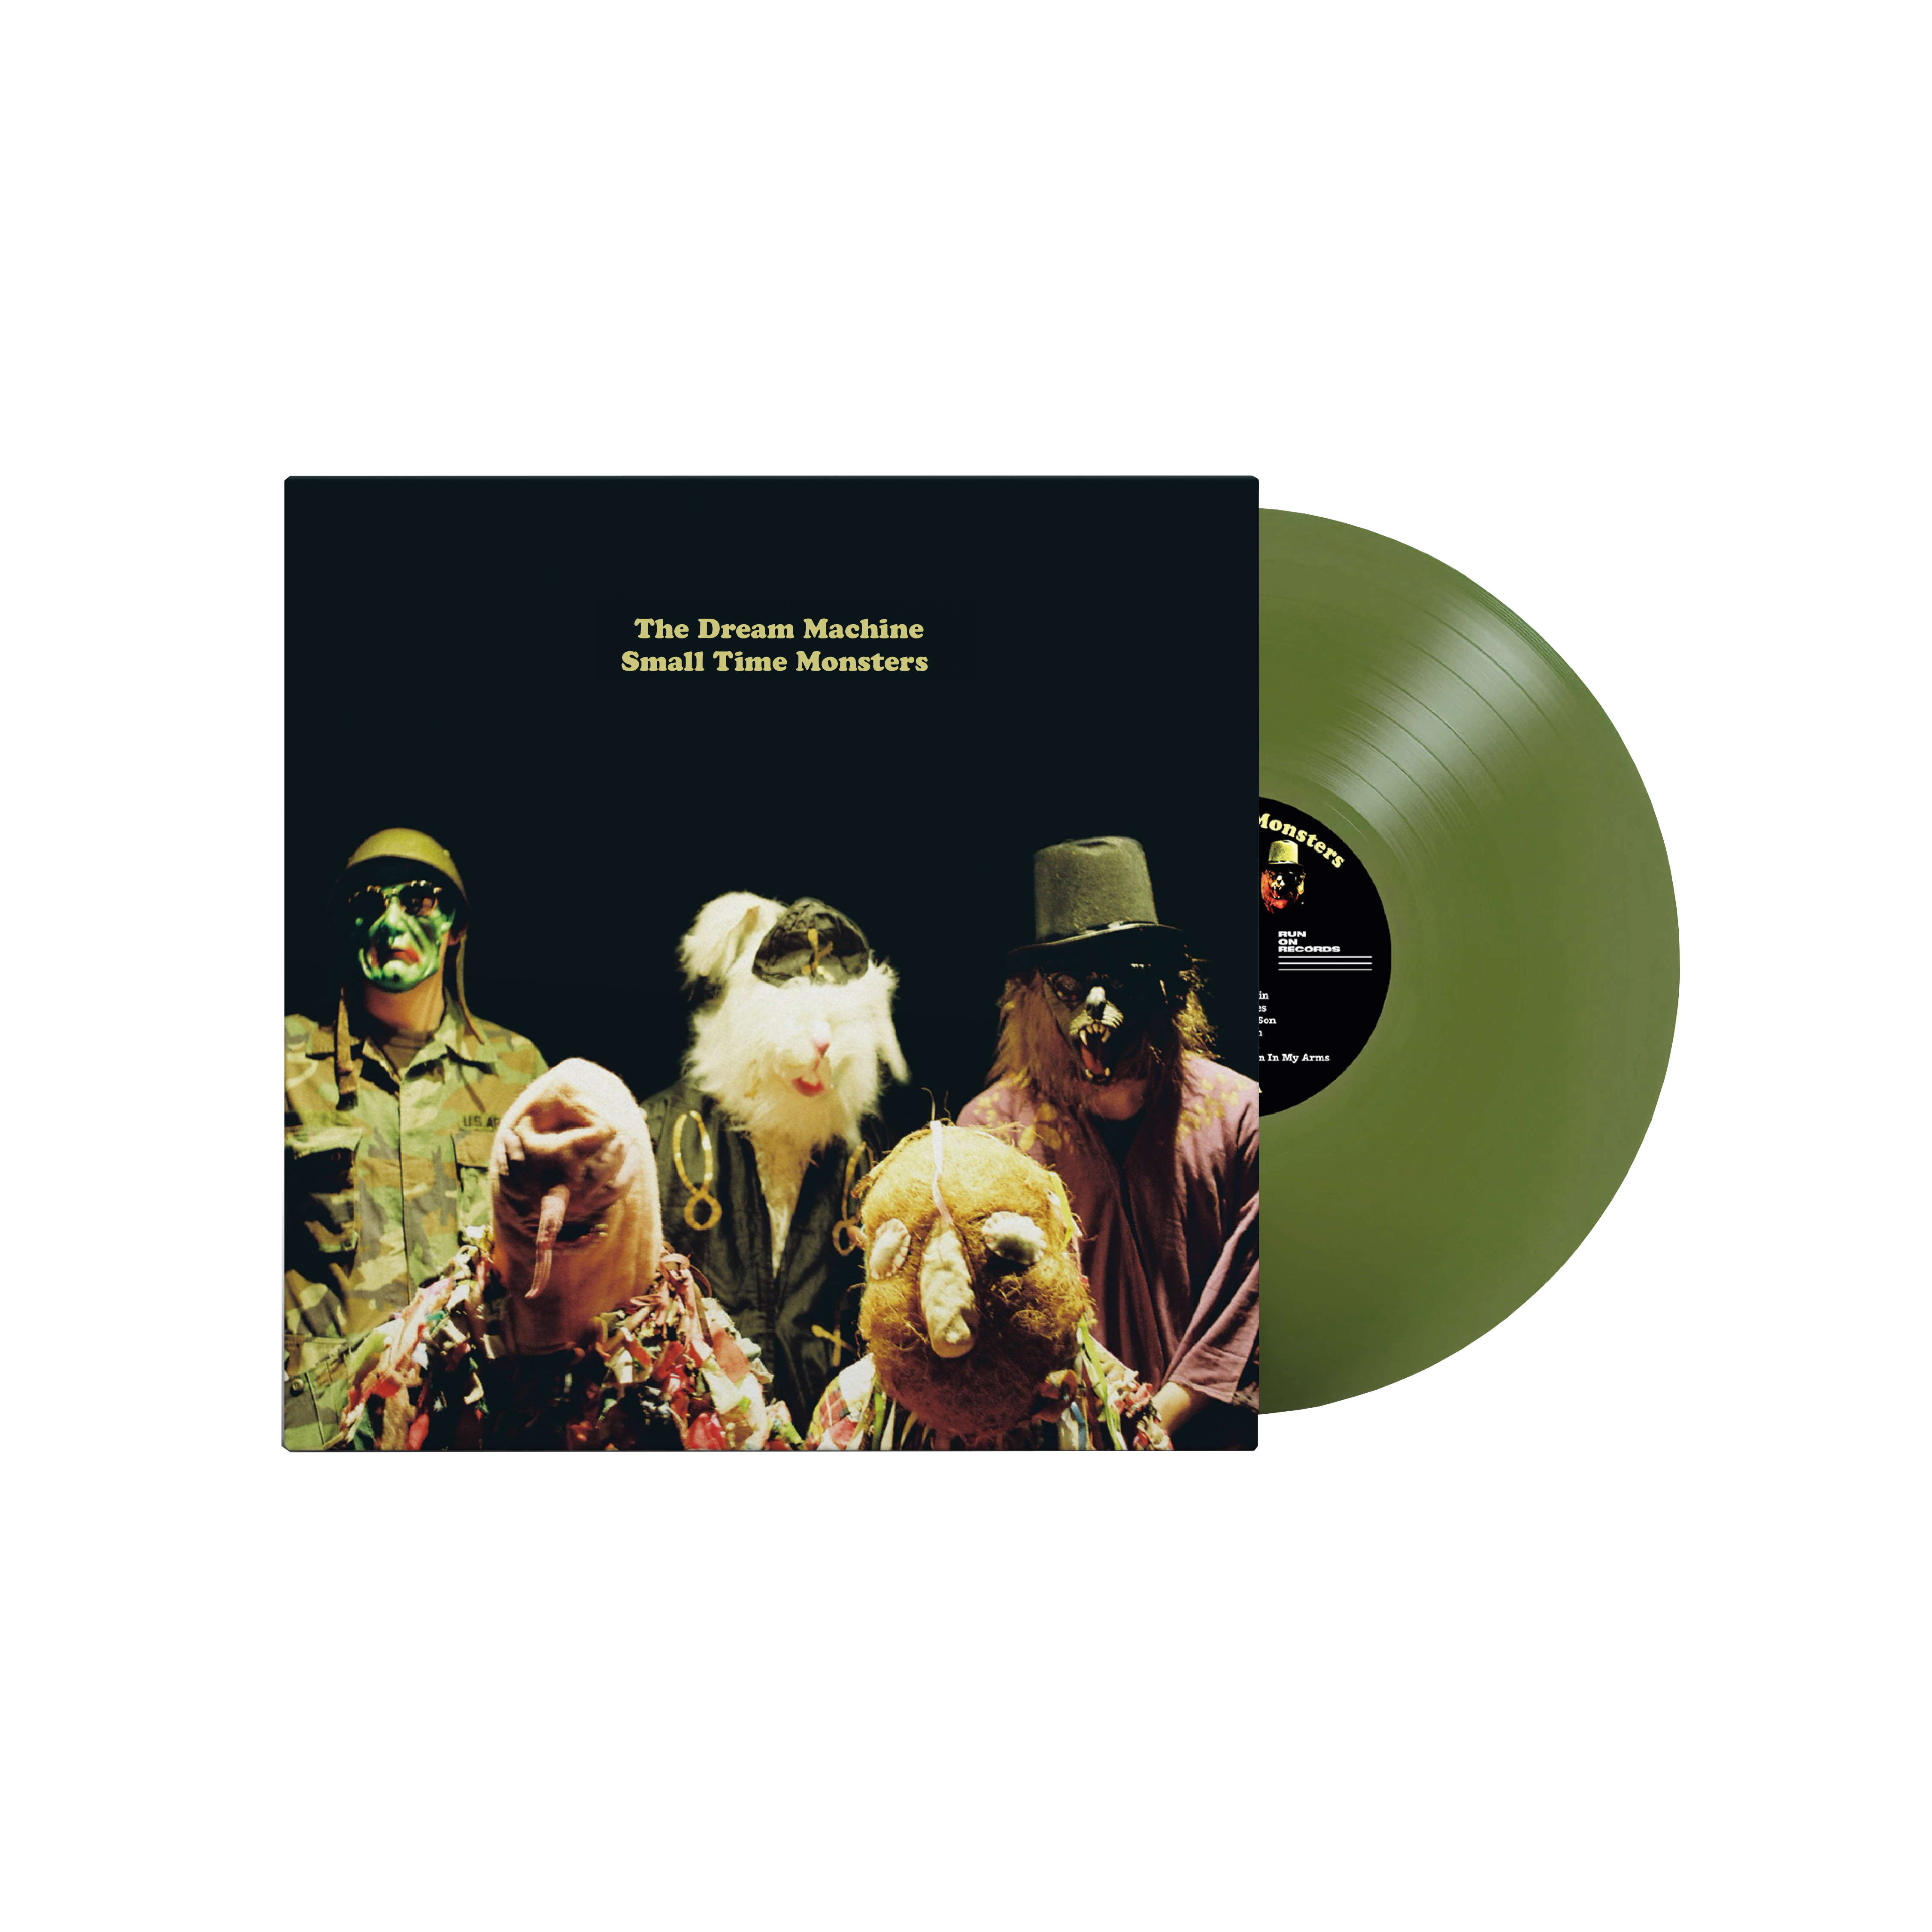 The Dream Machine - Small Time Monsters: Limited Green Vinyl LP